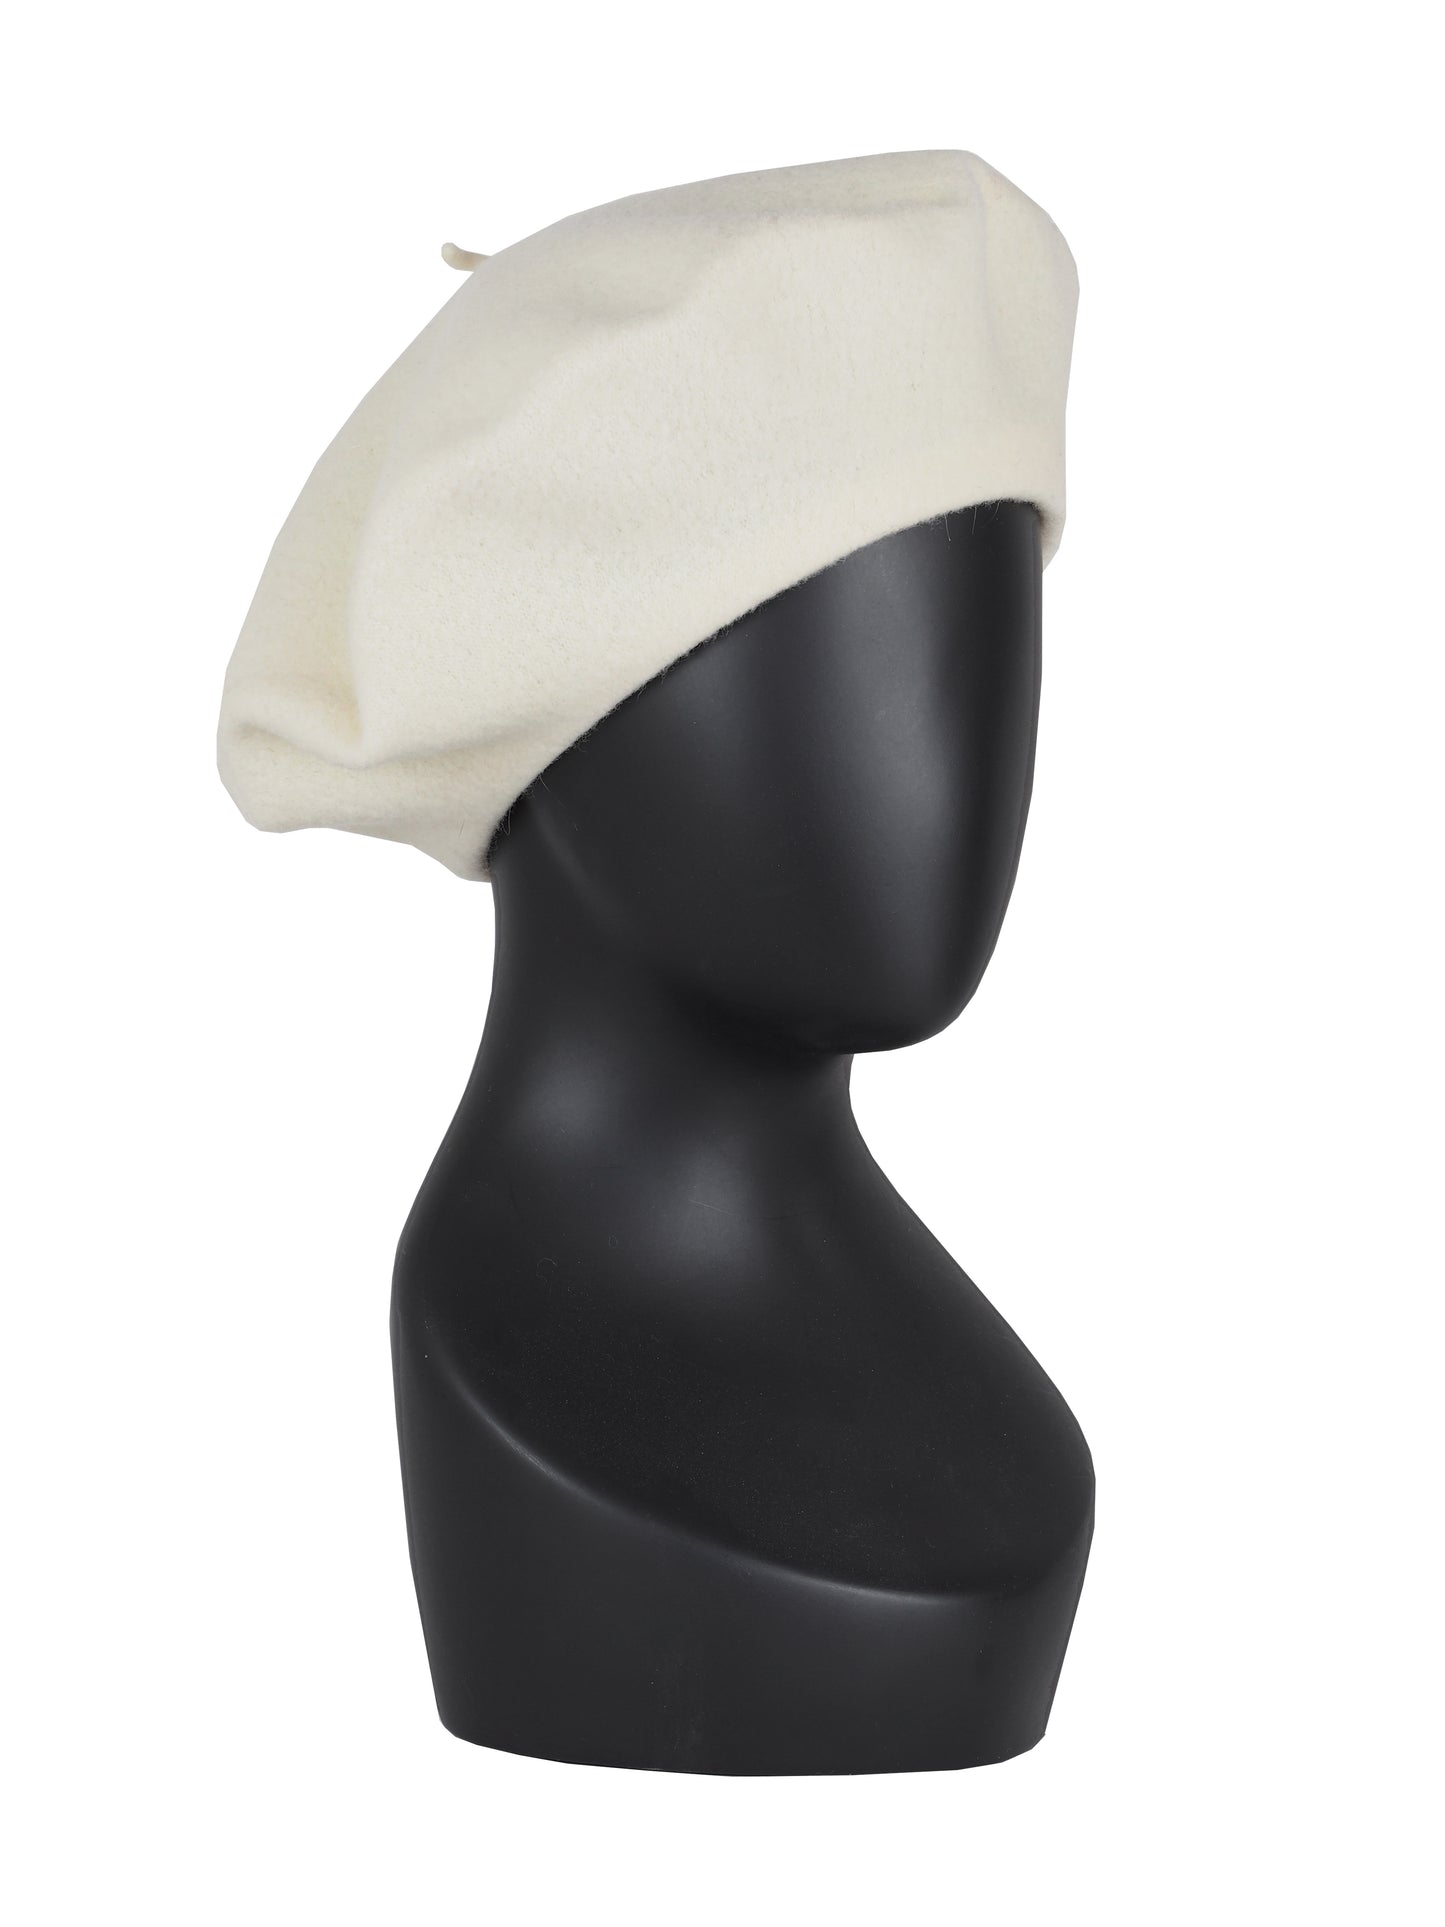 OFF WHITE WOOL BERET